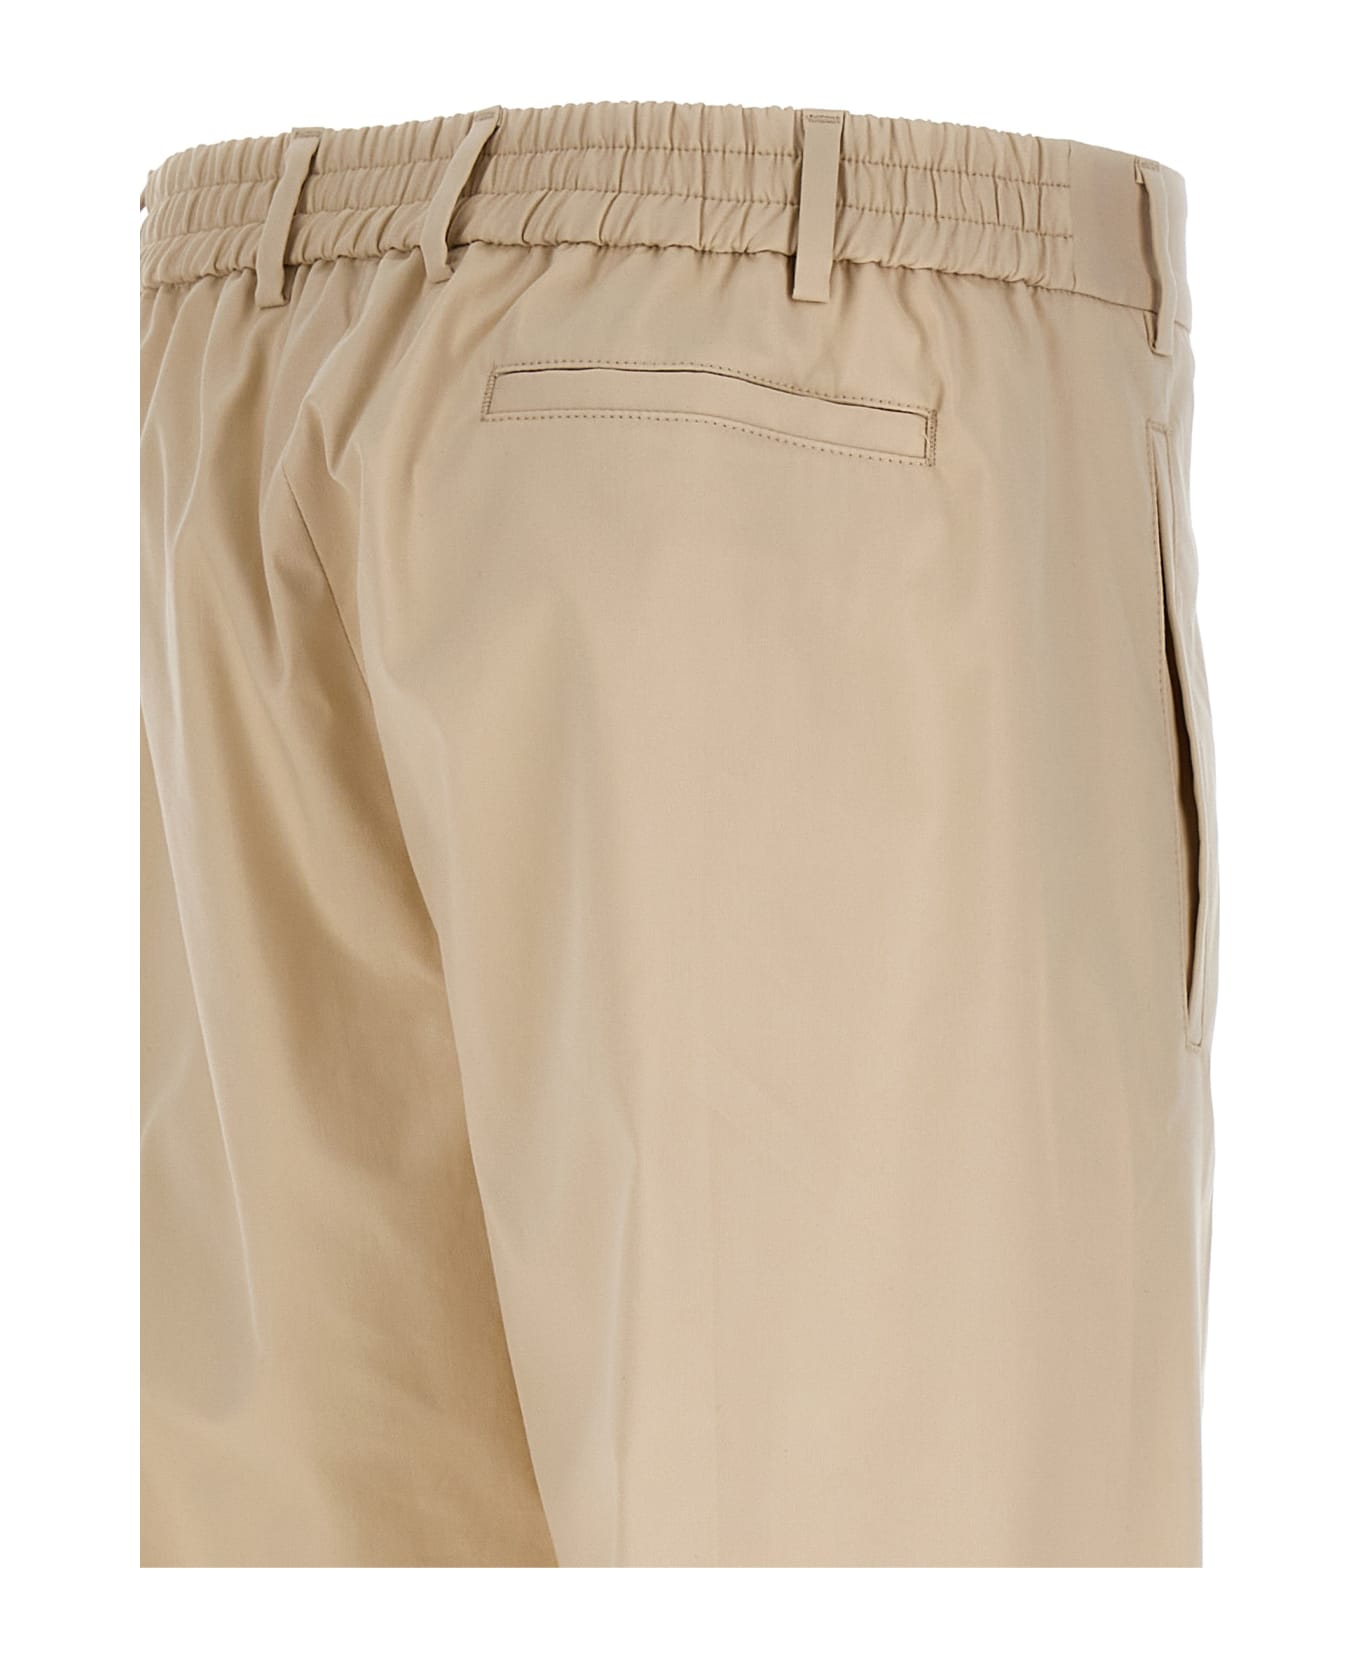 FourTwoFour on Fairfax Pants With Front Pleats - Beige